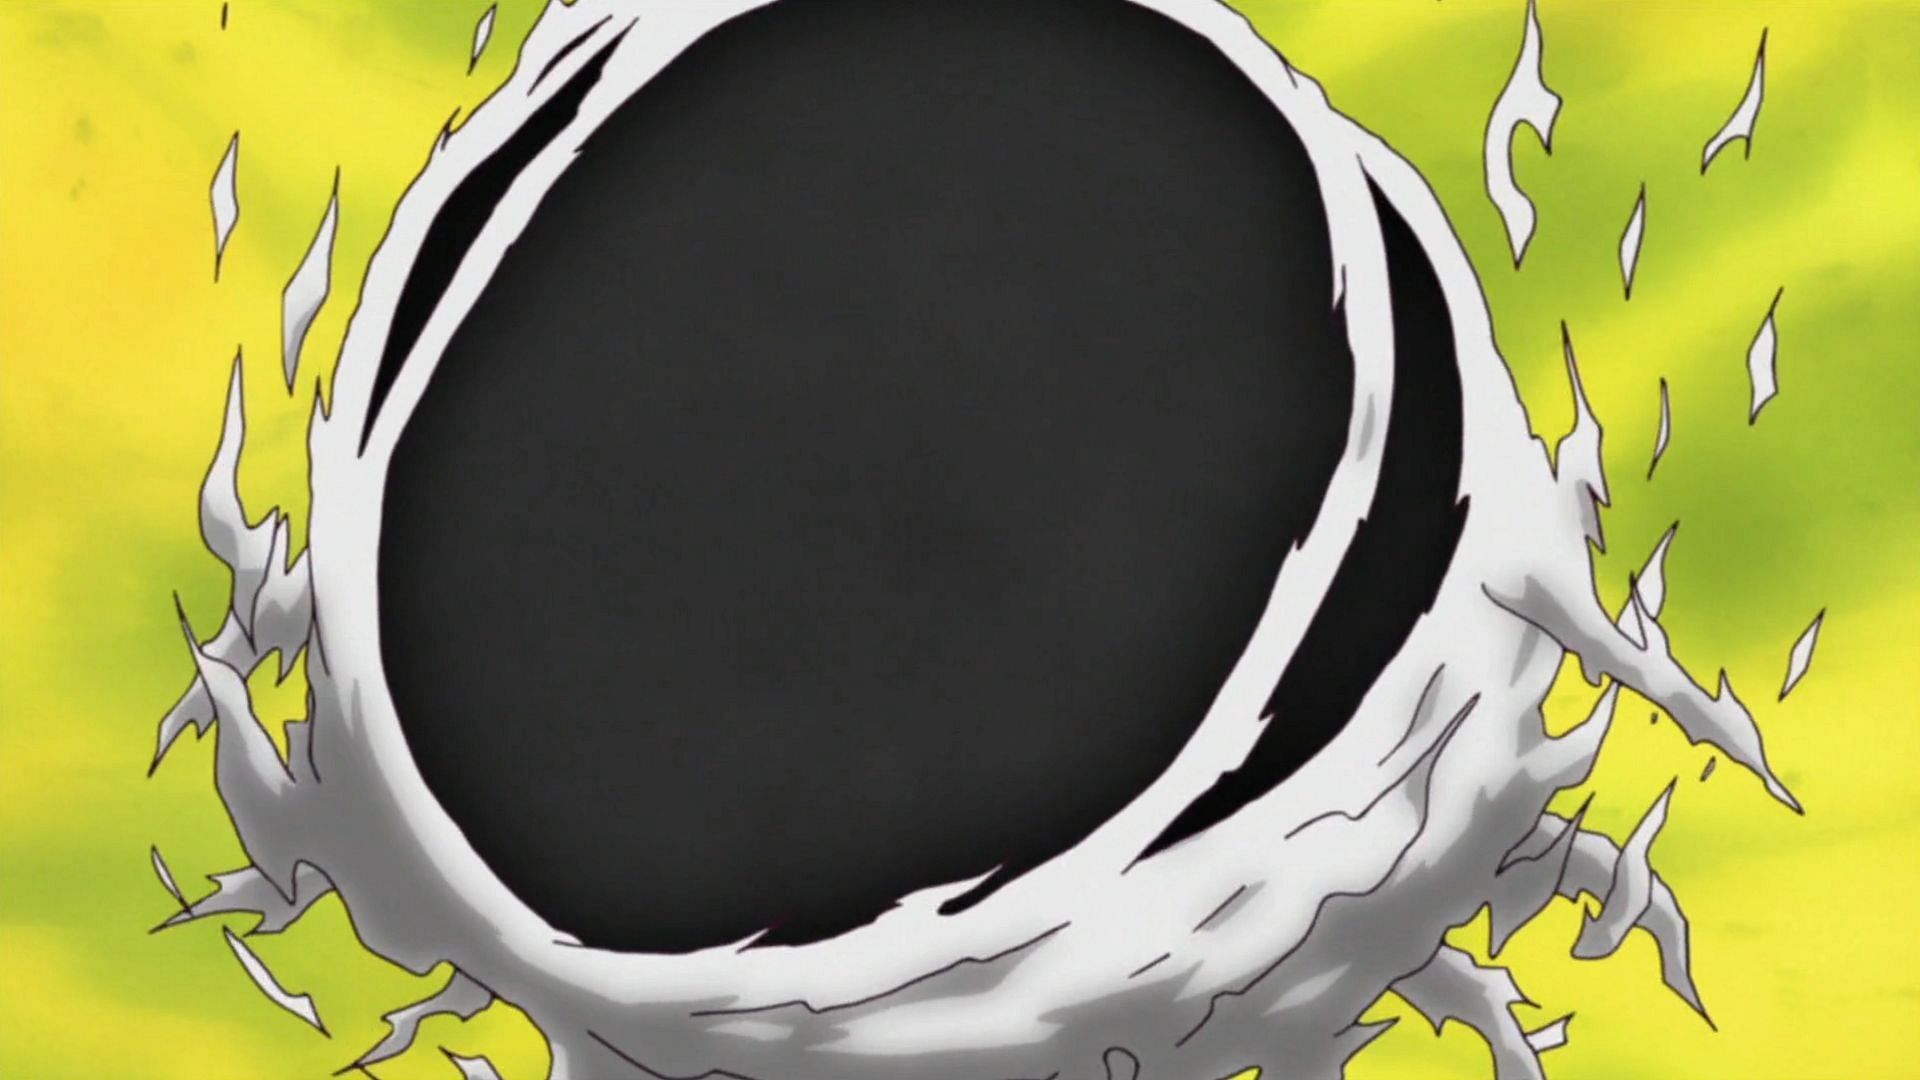 Kaguya's strongest move is the most powerful technique in the series (Image via Studio Pierrot, Naruto)